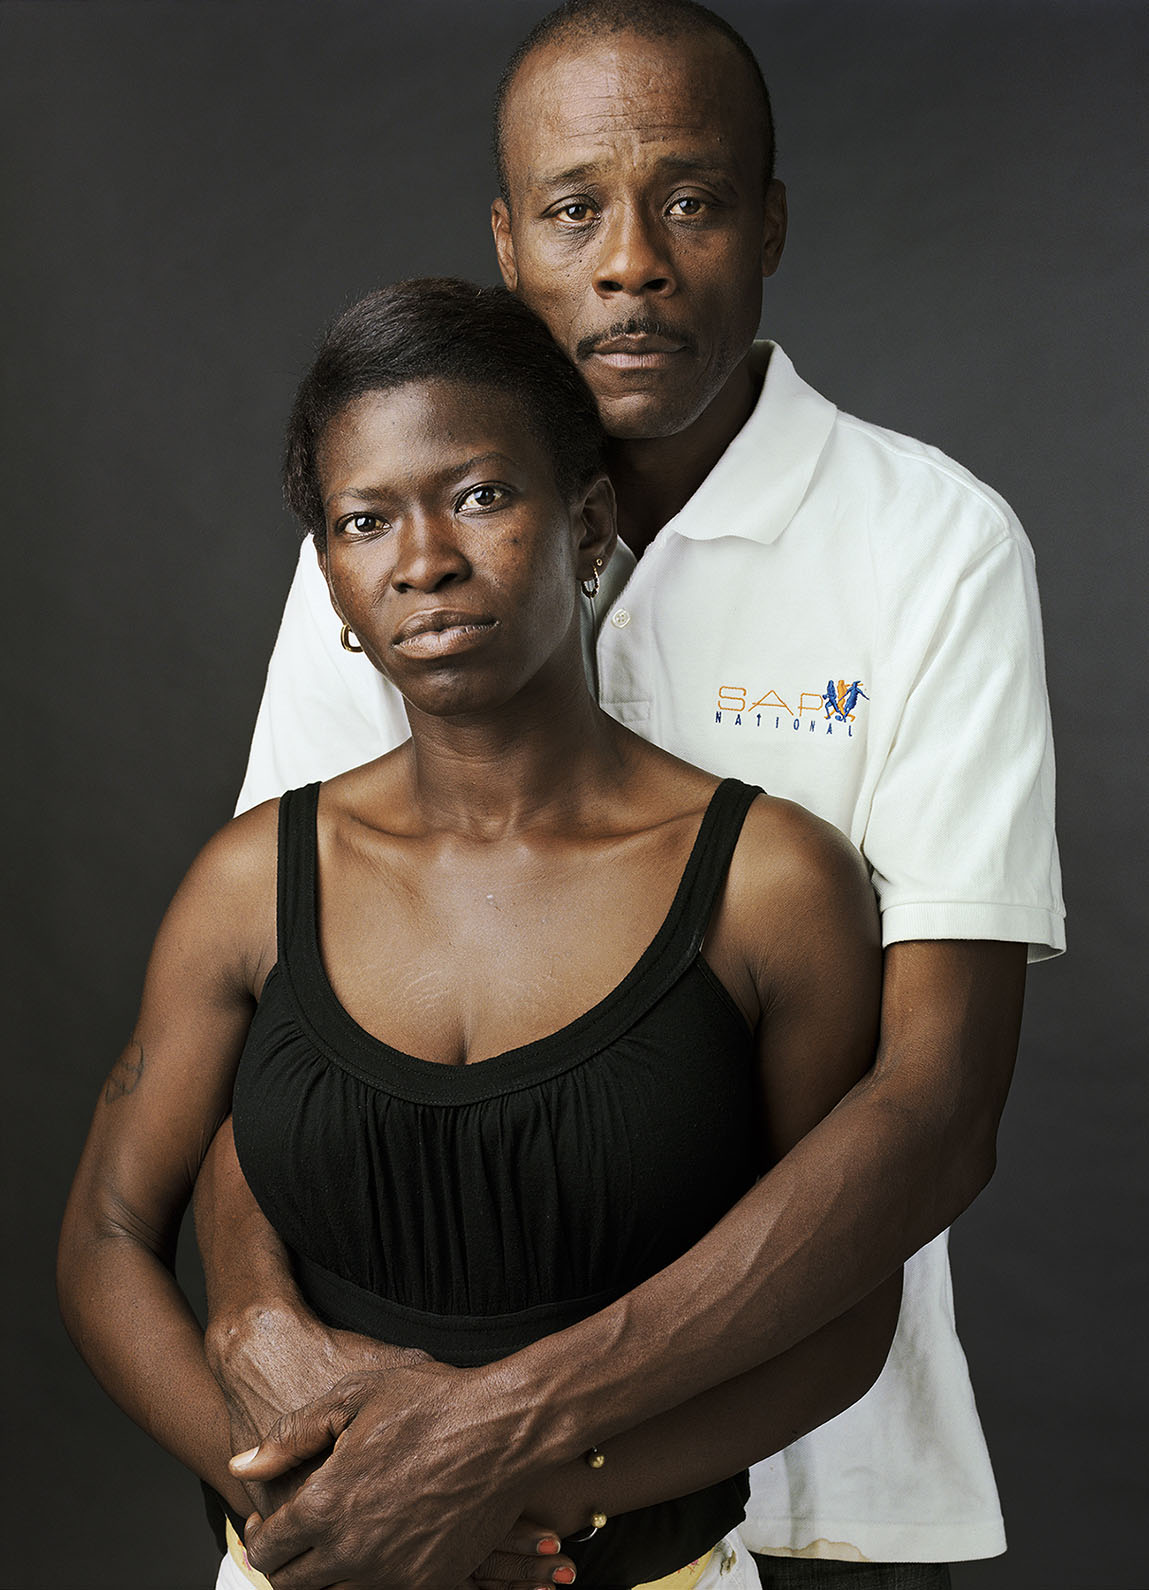 USA. "Down and Out in the South": Studio portraits of homeless people in Atlanta (GA), Columbia (SC) and the Mississippi Delta.  Sharlene (b. St. Catherine, Jamaica, 1976) and Elliot (b. 1Verona, Italy, 1960), photographed in Atlanta, GA. June 2011.